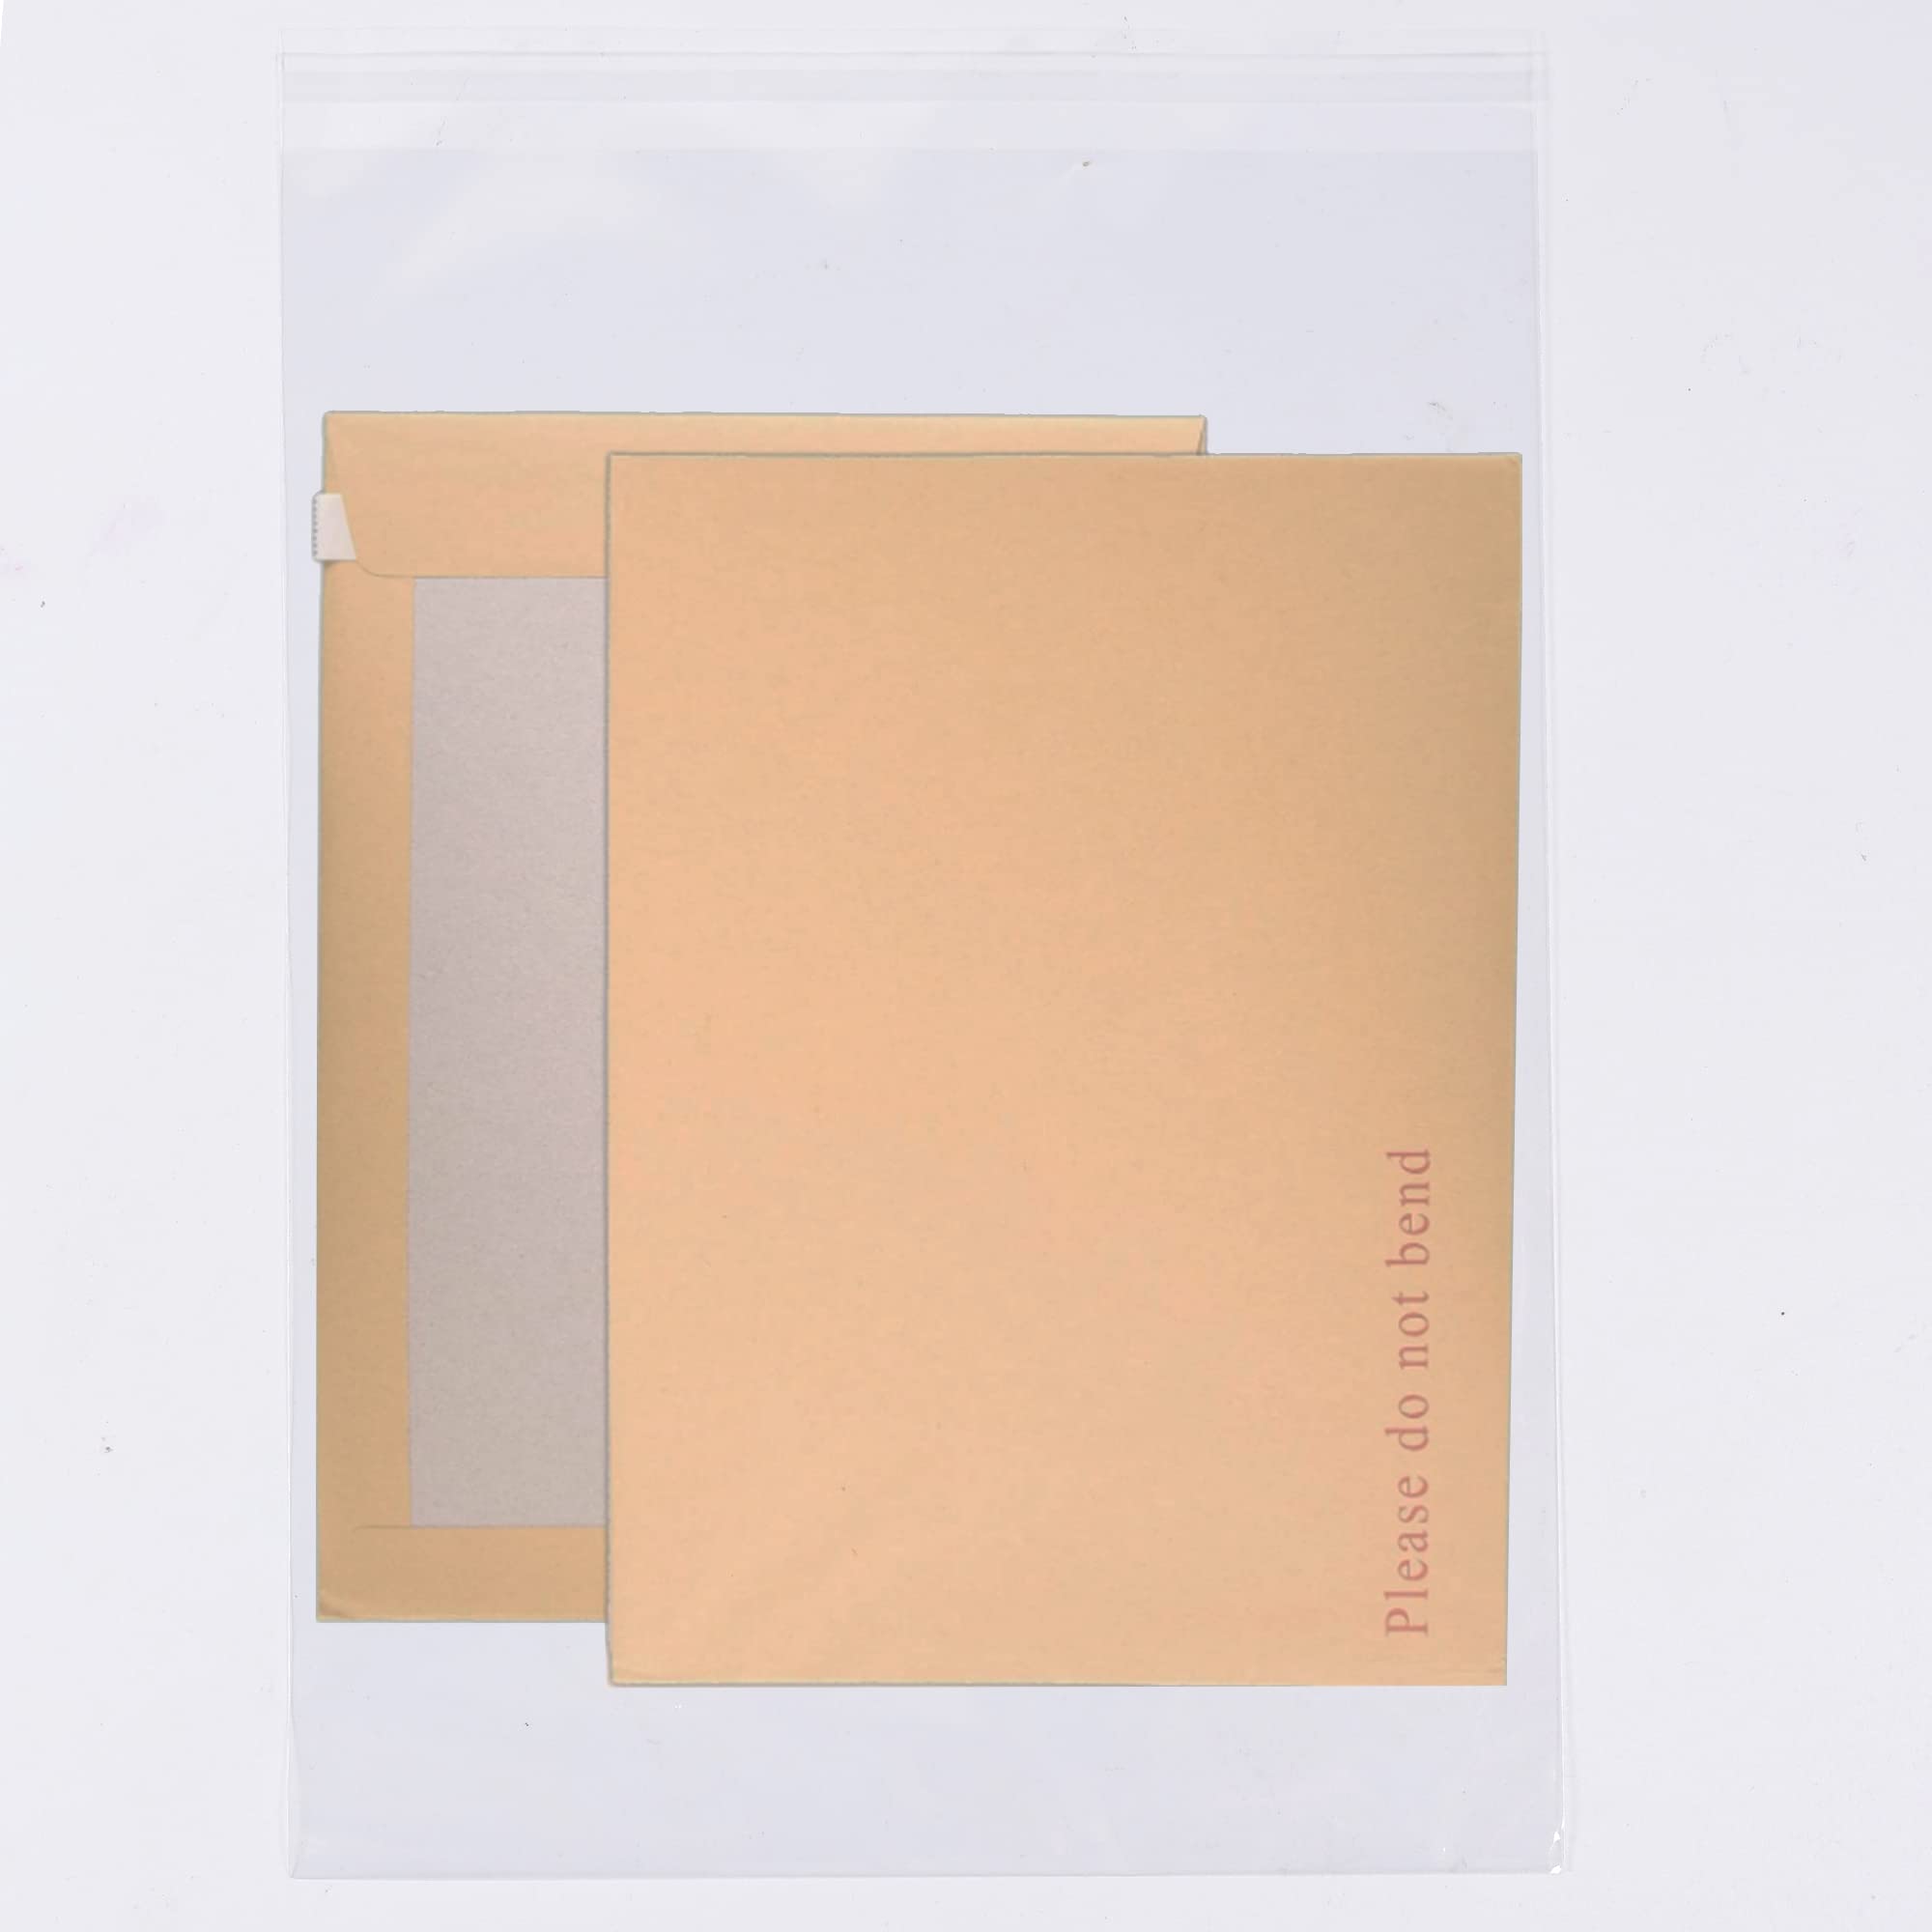 A3 Self-adhesive Clear Bags 50 Packs, Self Sealing Cellophane Display Bags/Sealable Bags, Food Safe, Cello Bags OPP for Cookies,Cards,Envelopes,Pictures (30.5 x 42cm)